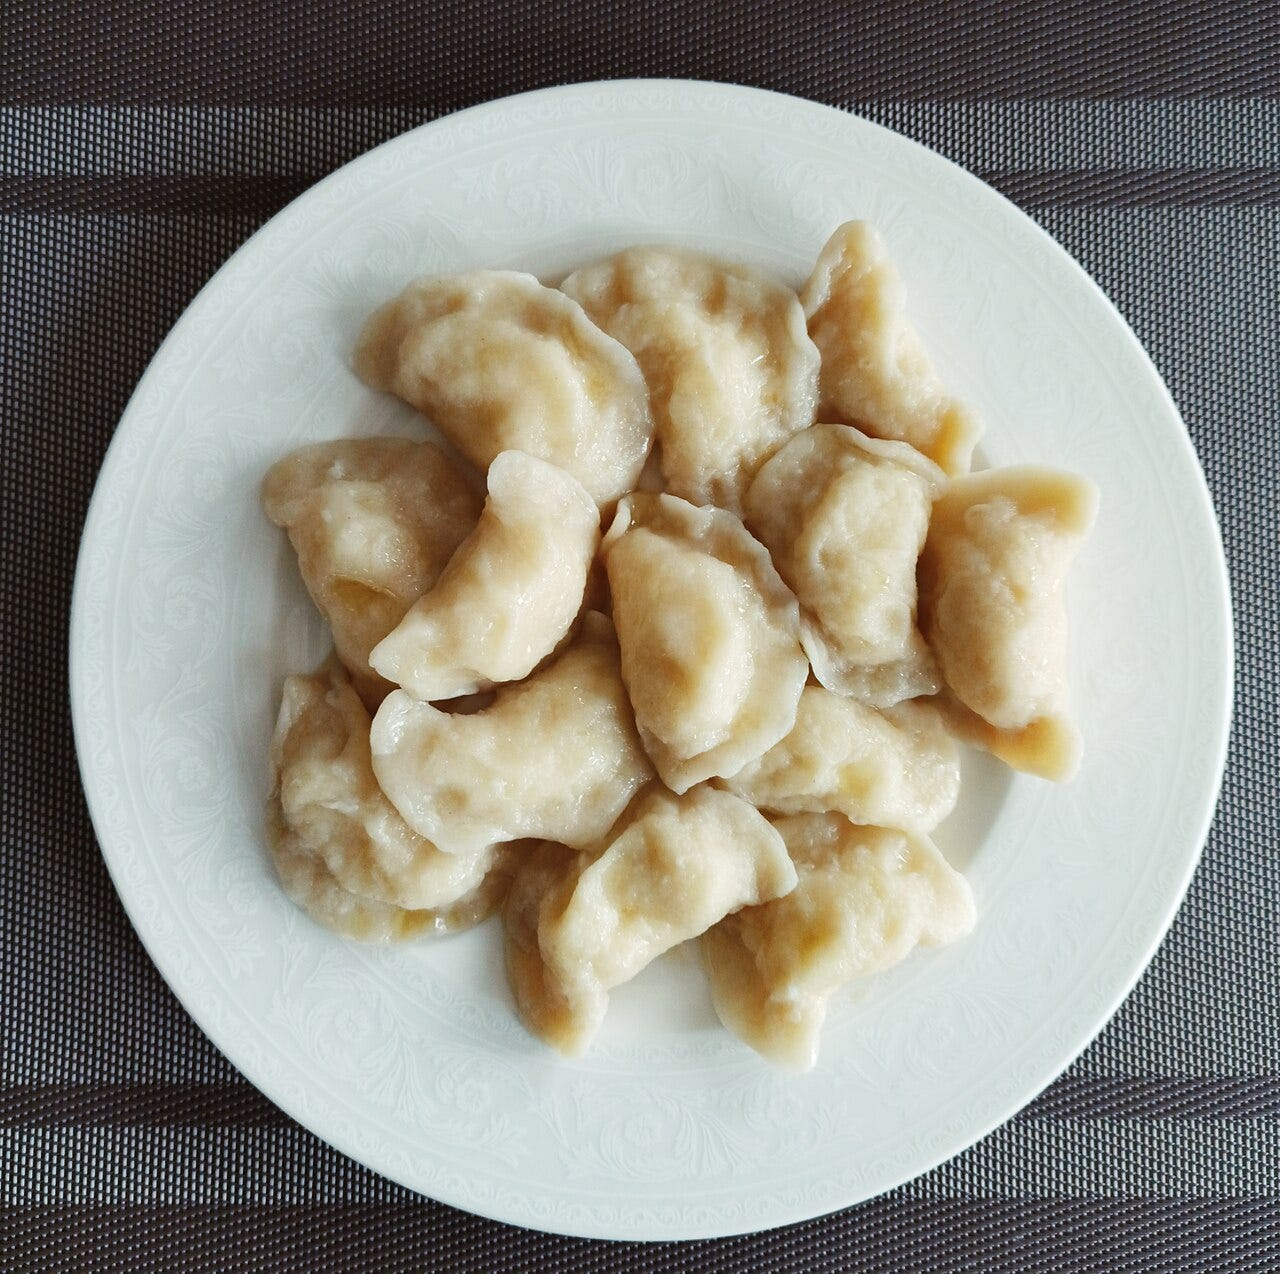 A plate full of pale, but likely very delicious, pierogies.